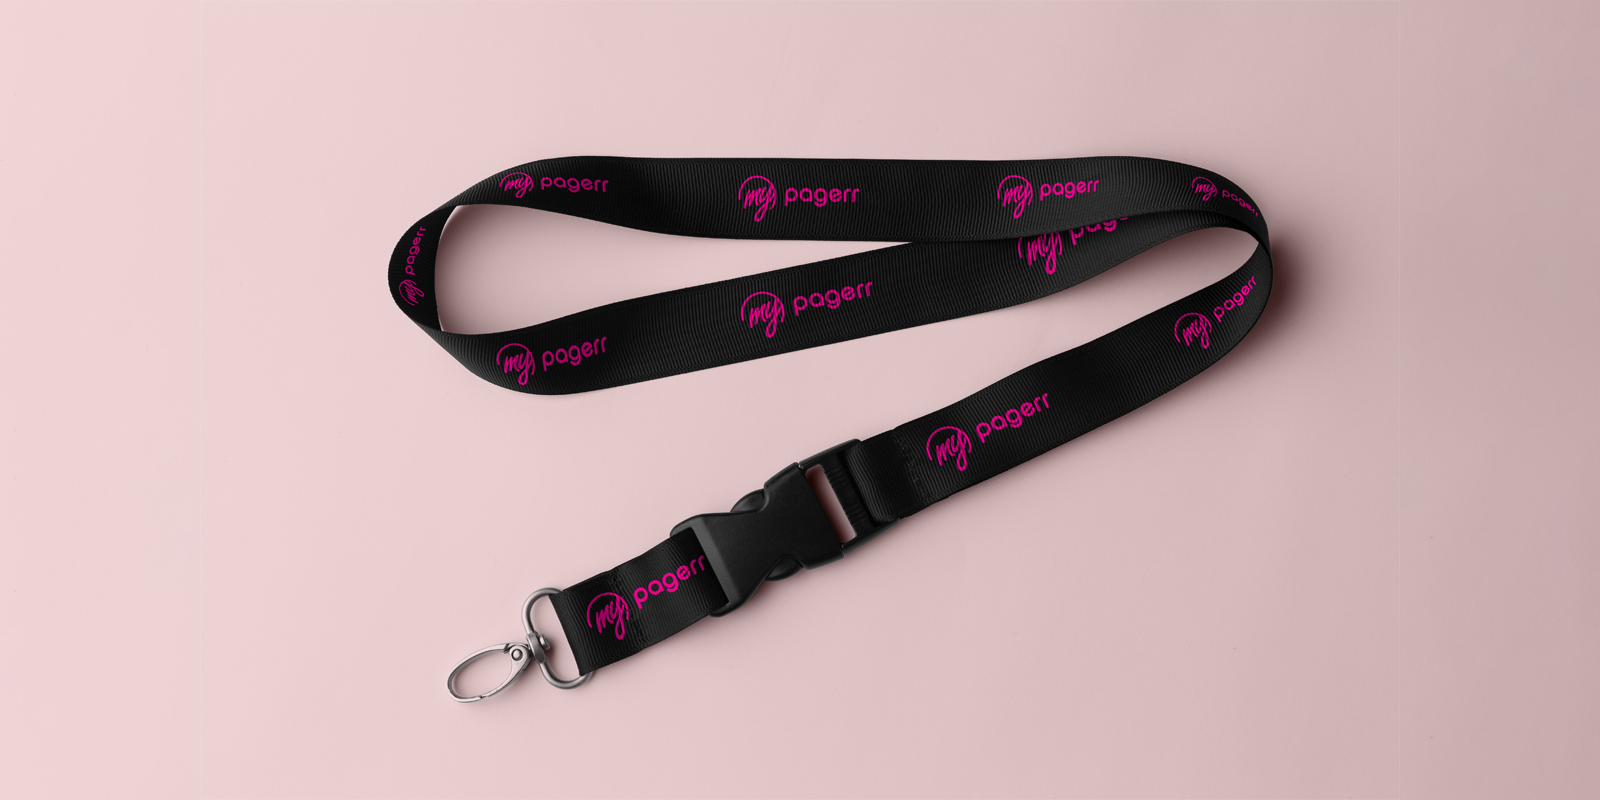 Lanyards in Toowoomba - Print with Pagerr